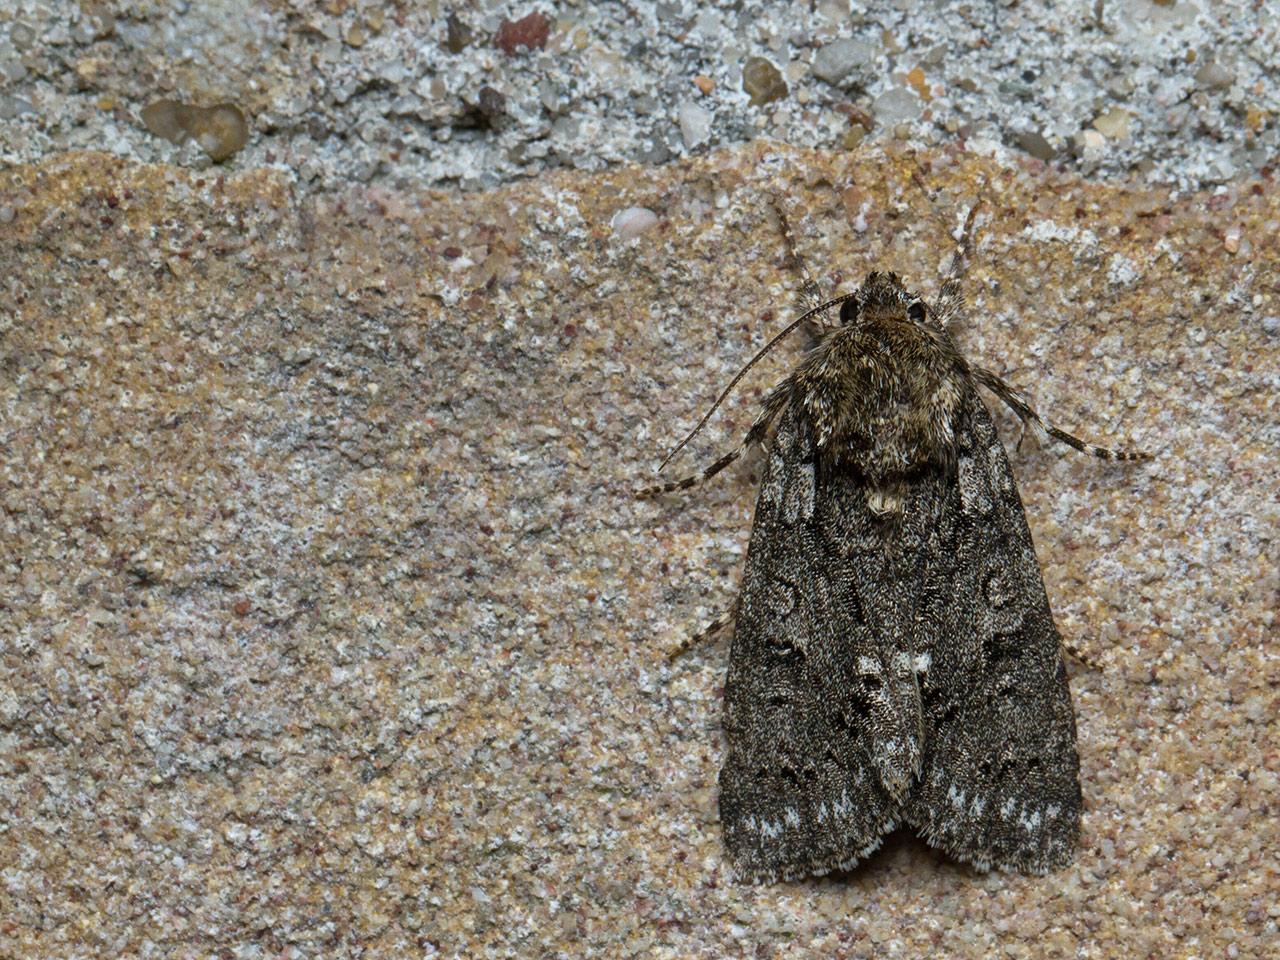 Zuringuil-Acronicta-rumicis-20140525g1280IMG_4202a.jpg